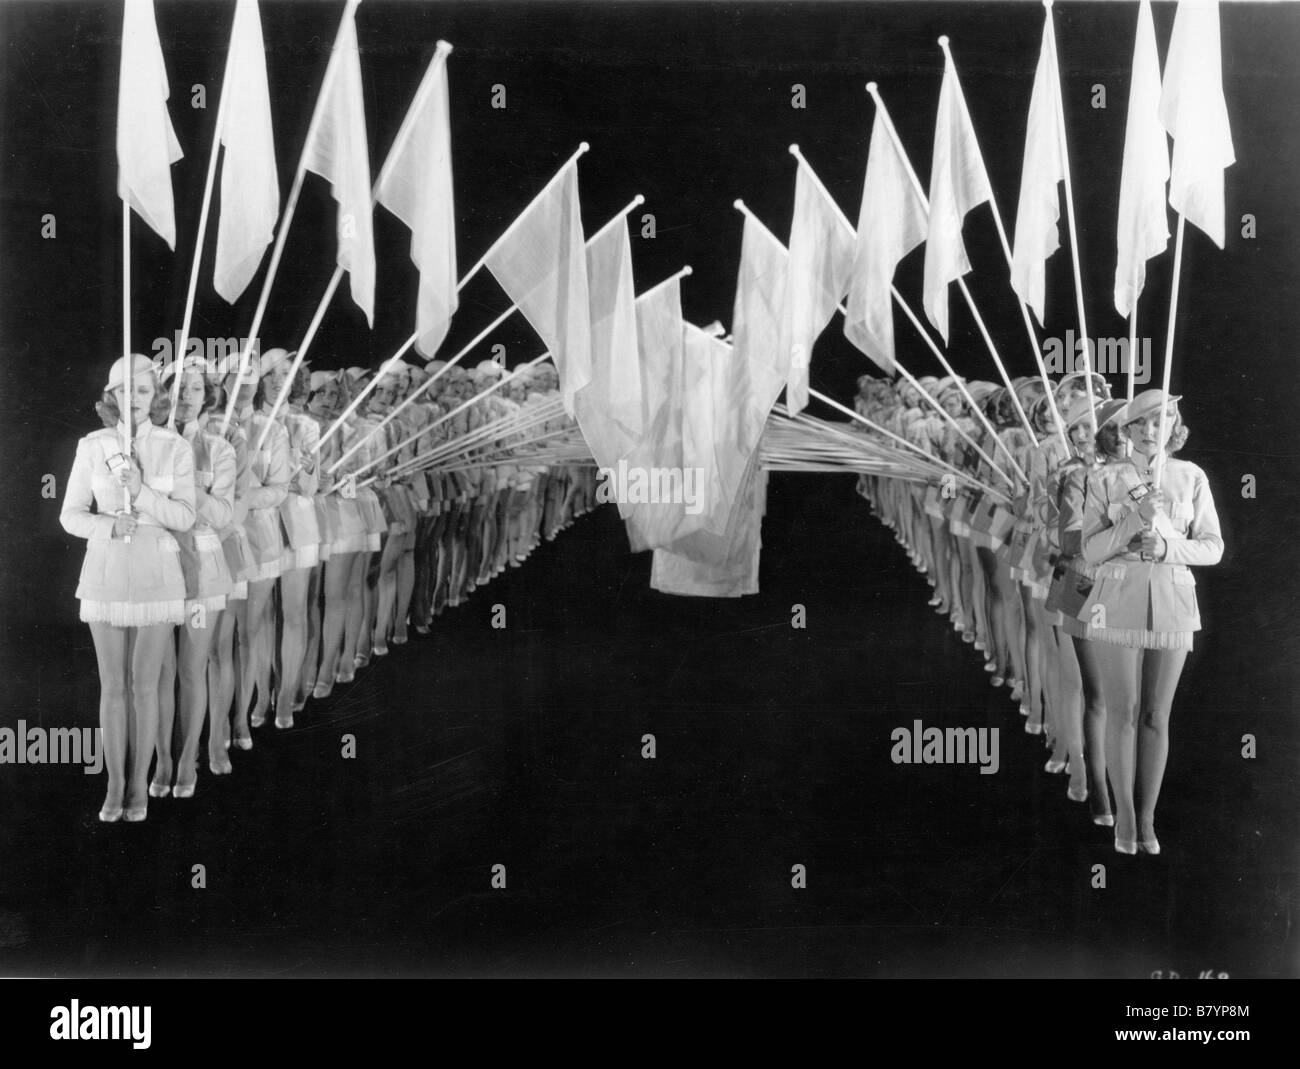 Gold diggers of 1935 1935 Busby Berkeley Stock Photo - Alamy